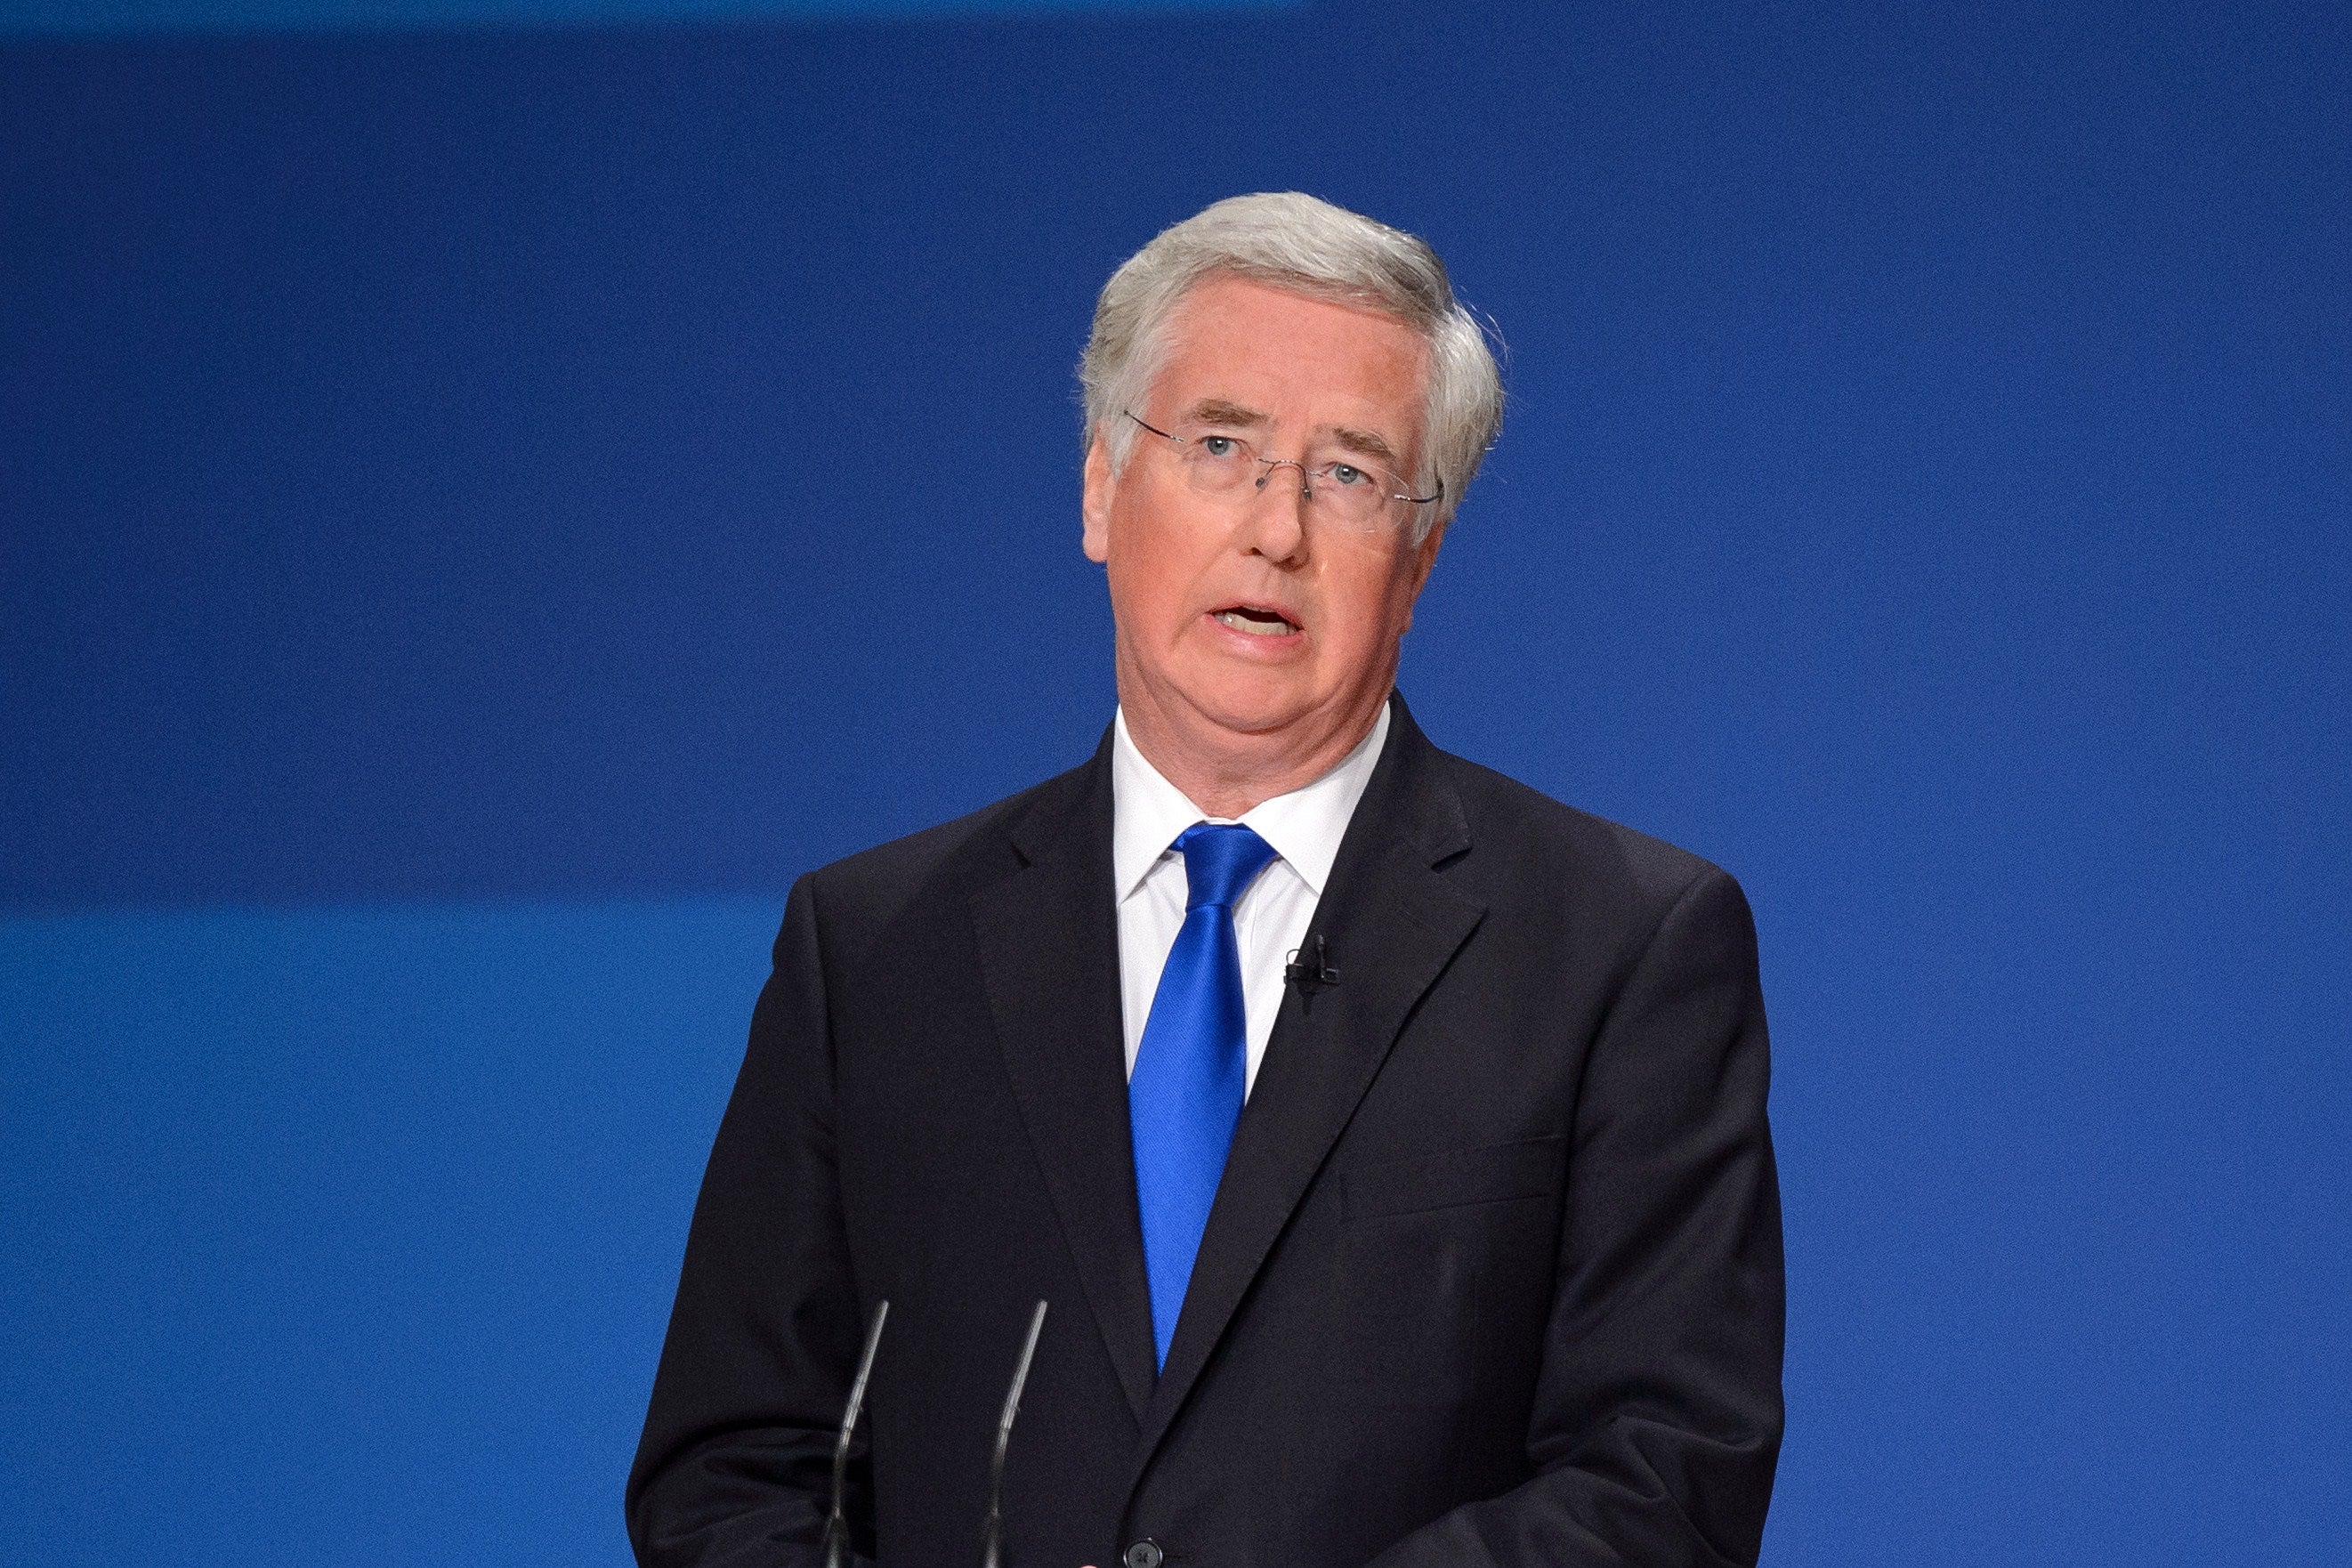 Twitter reacts to comments by Michael Fallon that some UK towns are 'swamped' with immigrants